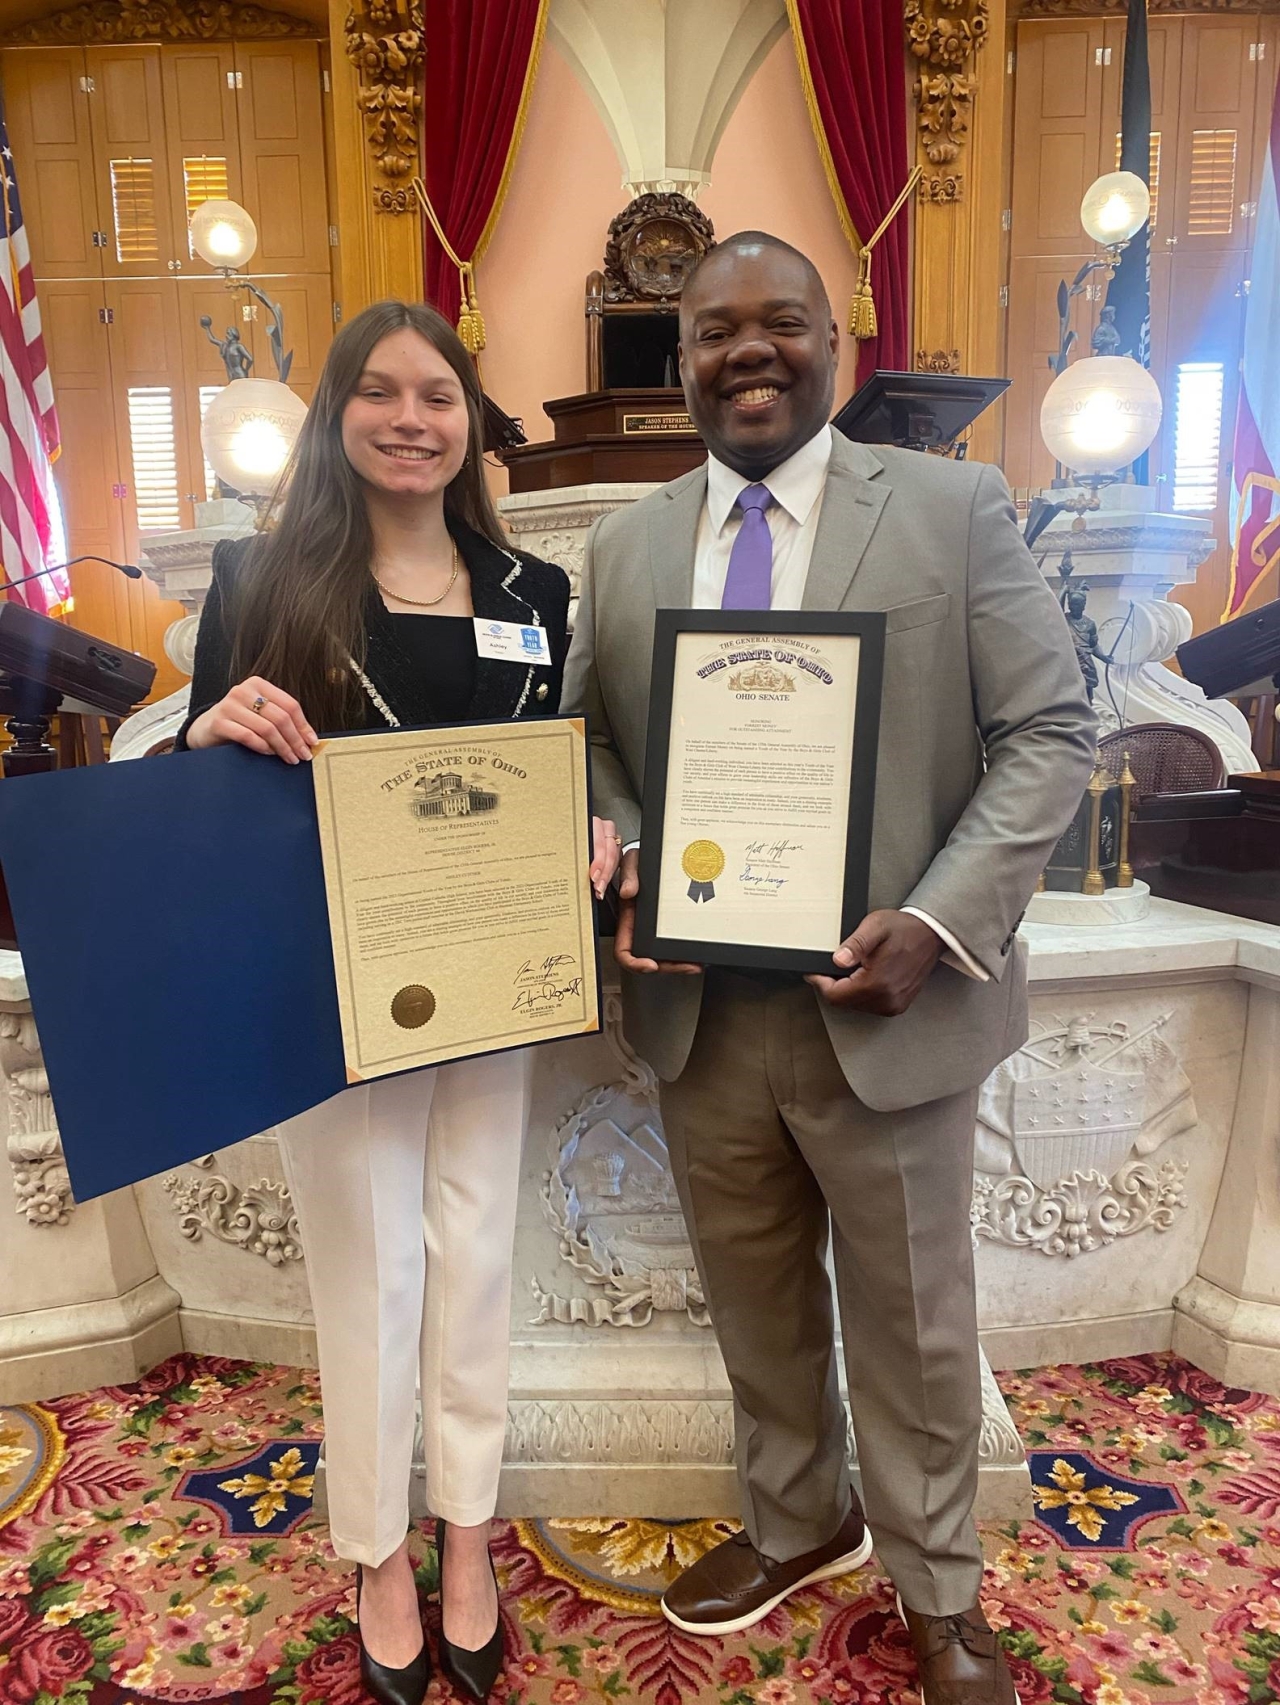 Rep. Rogers presents a commendation to Ashley Cutcher, the Boys and Girls Clubs of Toledo's 2023 Youth of the Year award winner